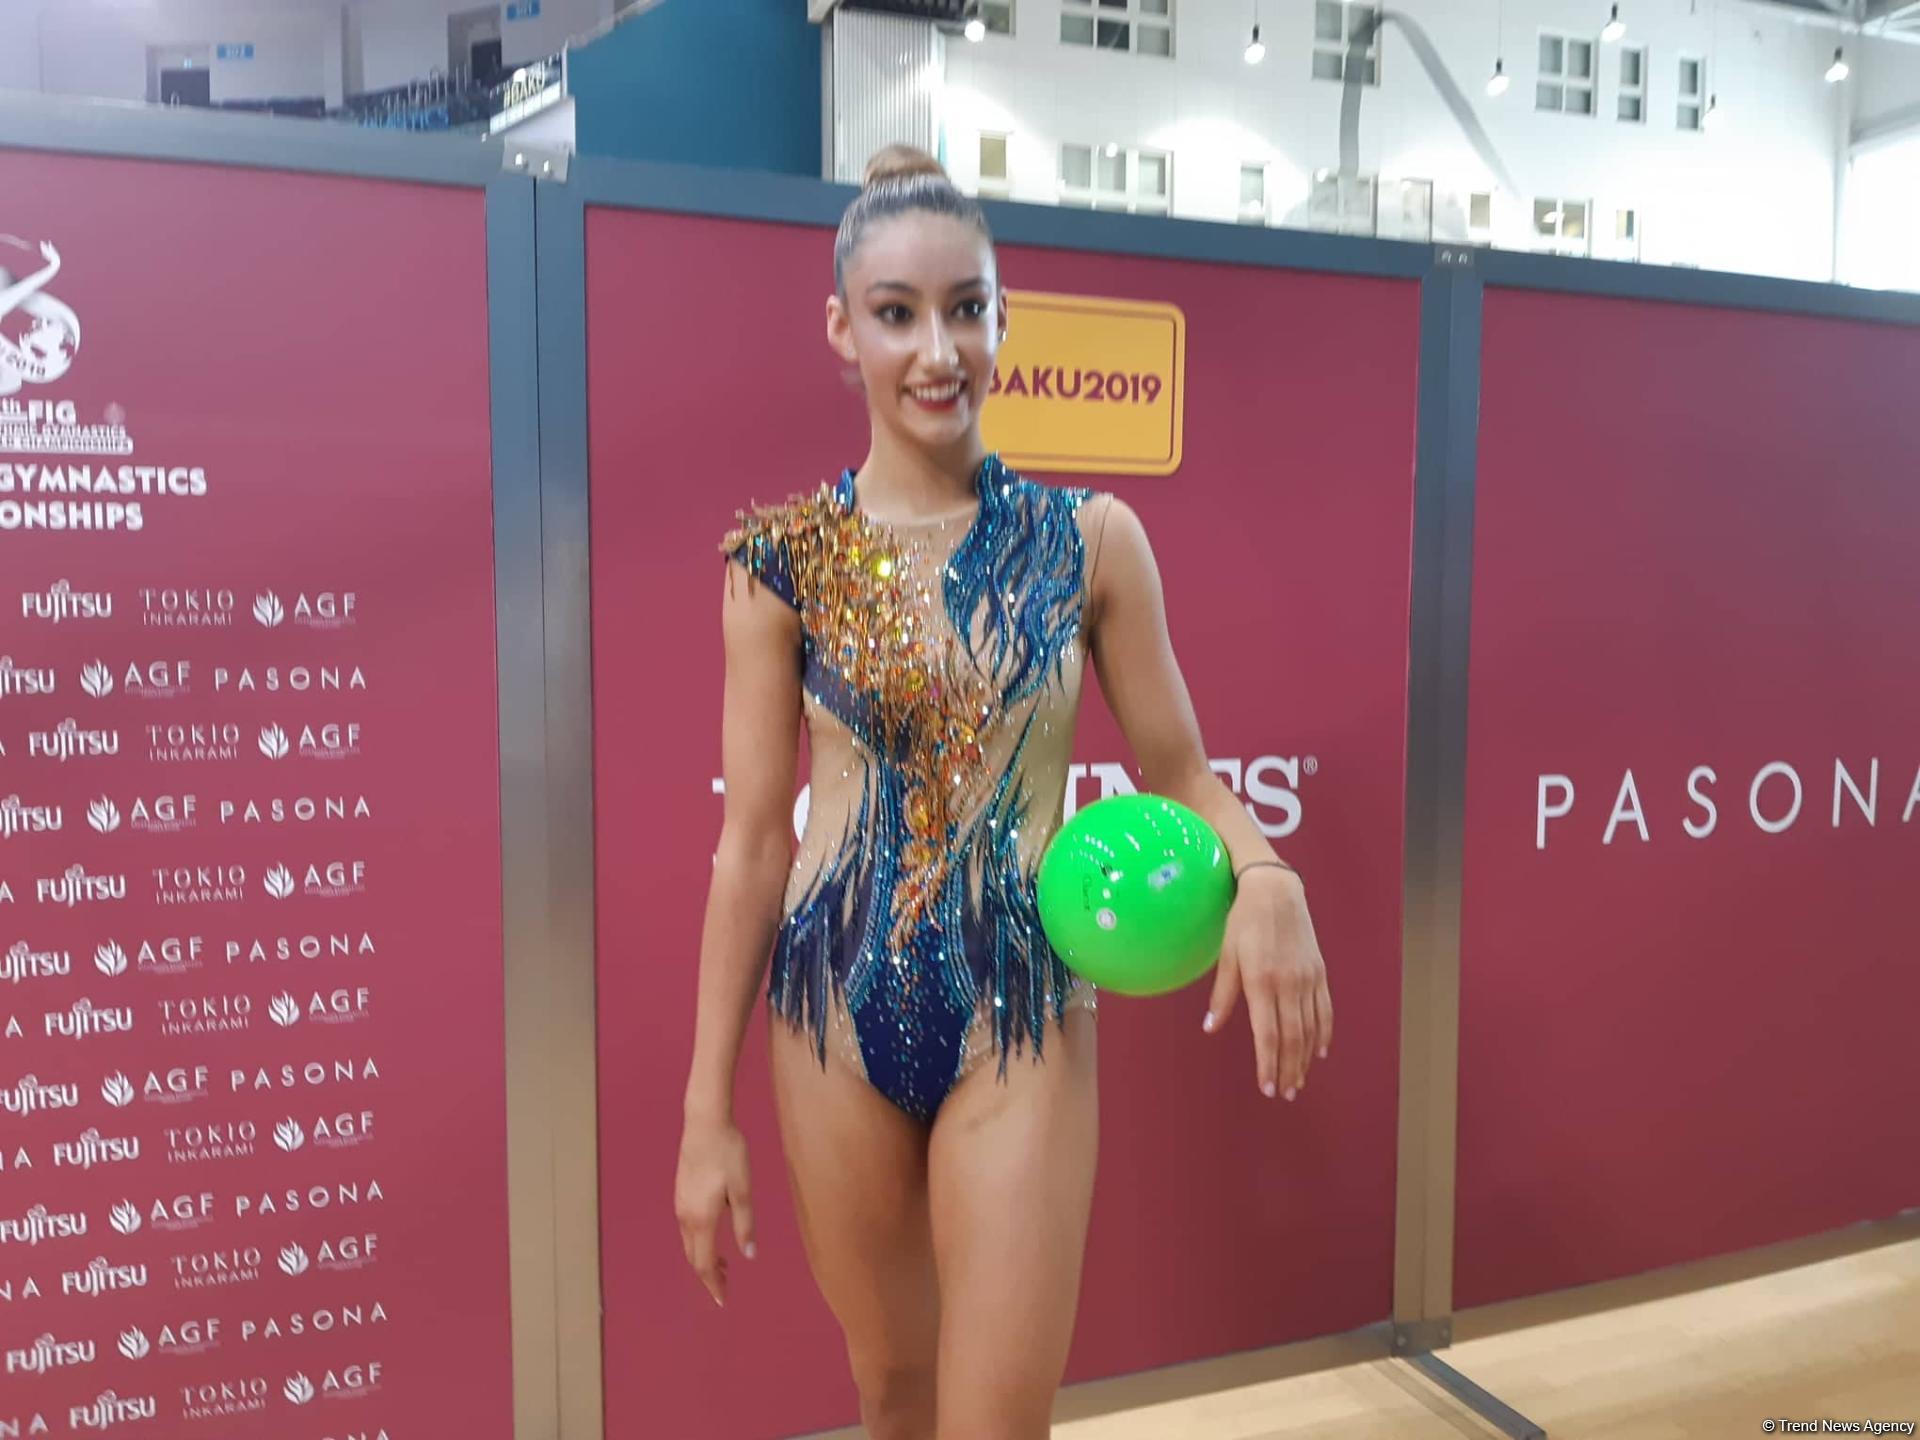 Gymnast: One day I hope Australia to have such chic arena as in Azerbaijan